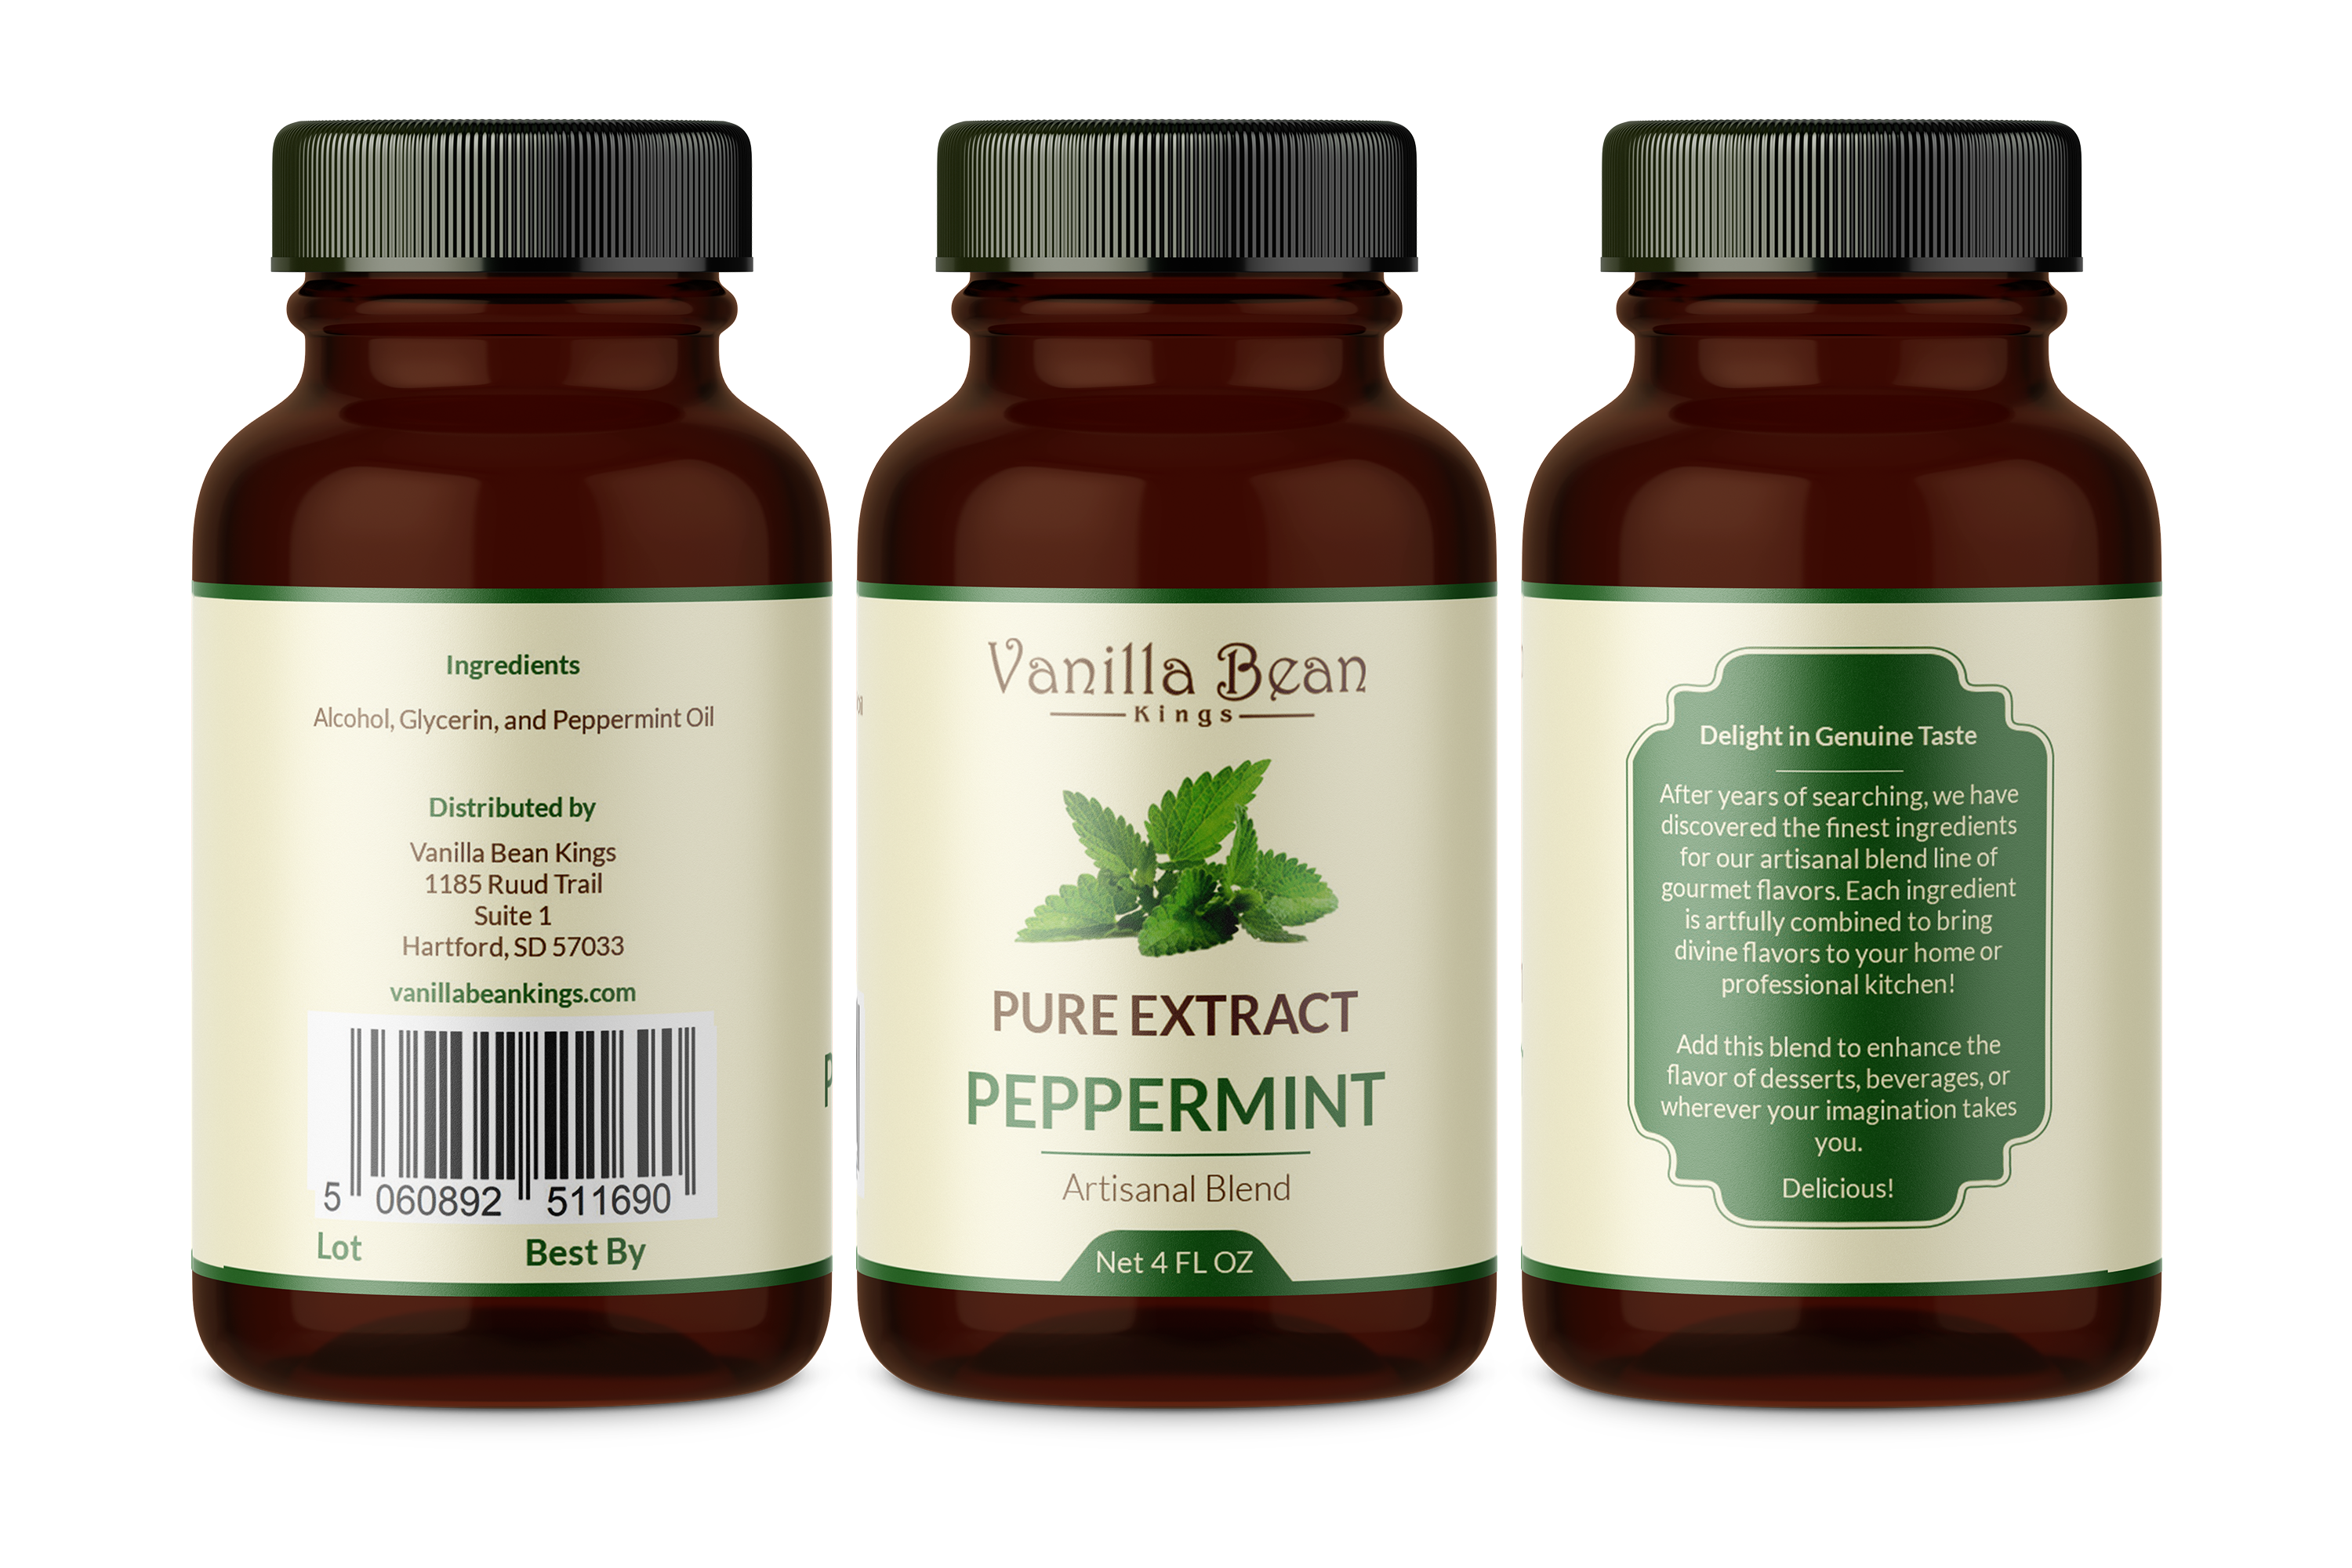 peppermint extract 4 oz bottle label